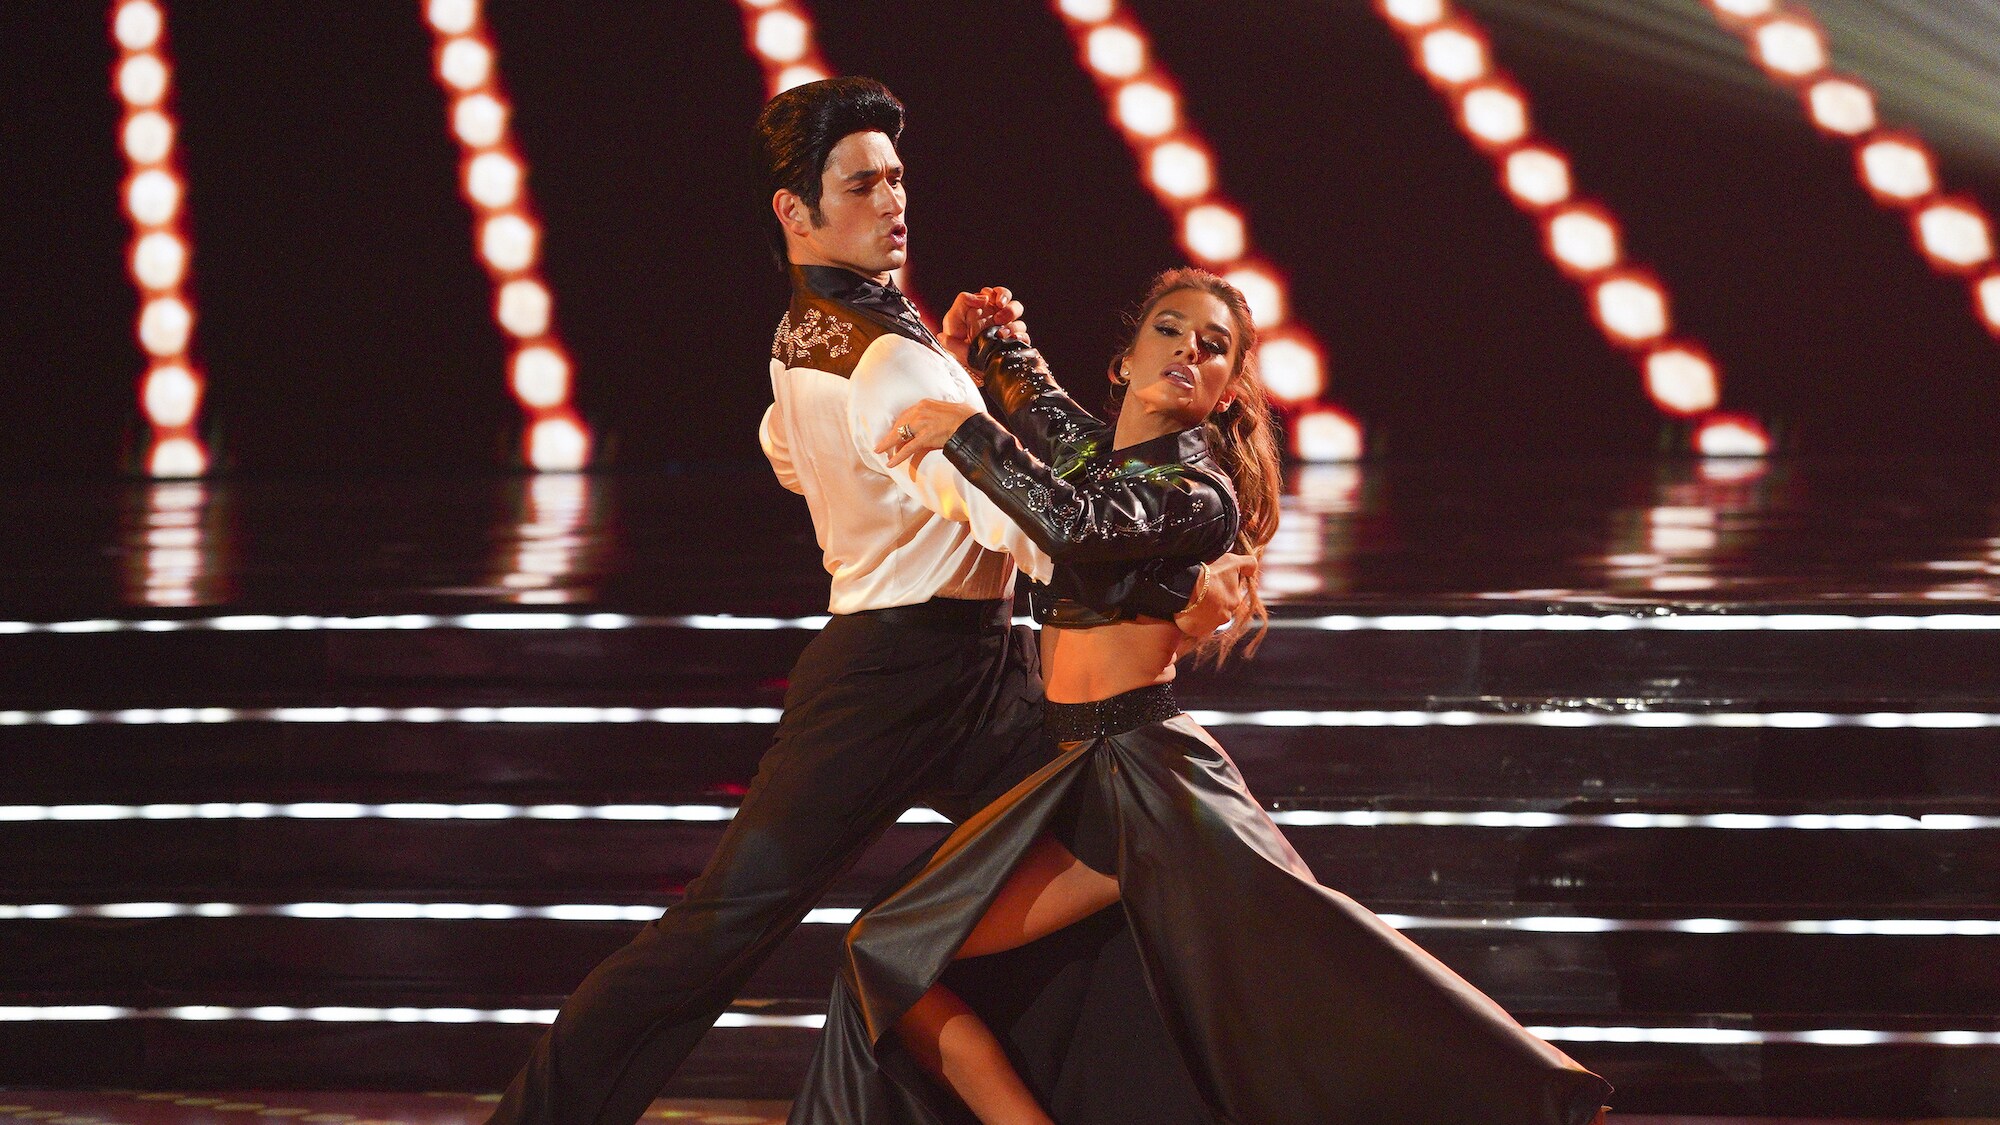 DANCING WITH THE STARS - “Elvis Night” –  The 15 remaining couples “Can’t Help Falling in Love” with Elvis this week as they take on all-new dance styles to music by The King of Rock ‘n’ Roll. Week two of the mirorrball competition will stream live MONDAY, SEPT. 26 (8:00pm ET / 5:00pm PT), on Disney+. (ABC/Christopher Willard) ALAN BERSTEN, JESSIE JAMES DECKER